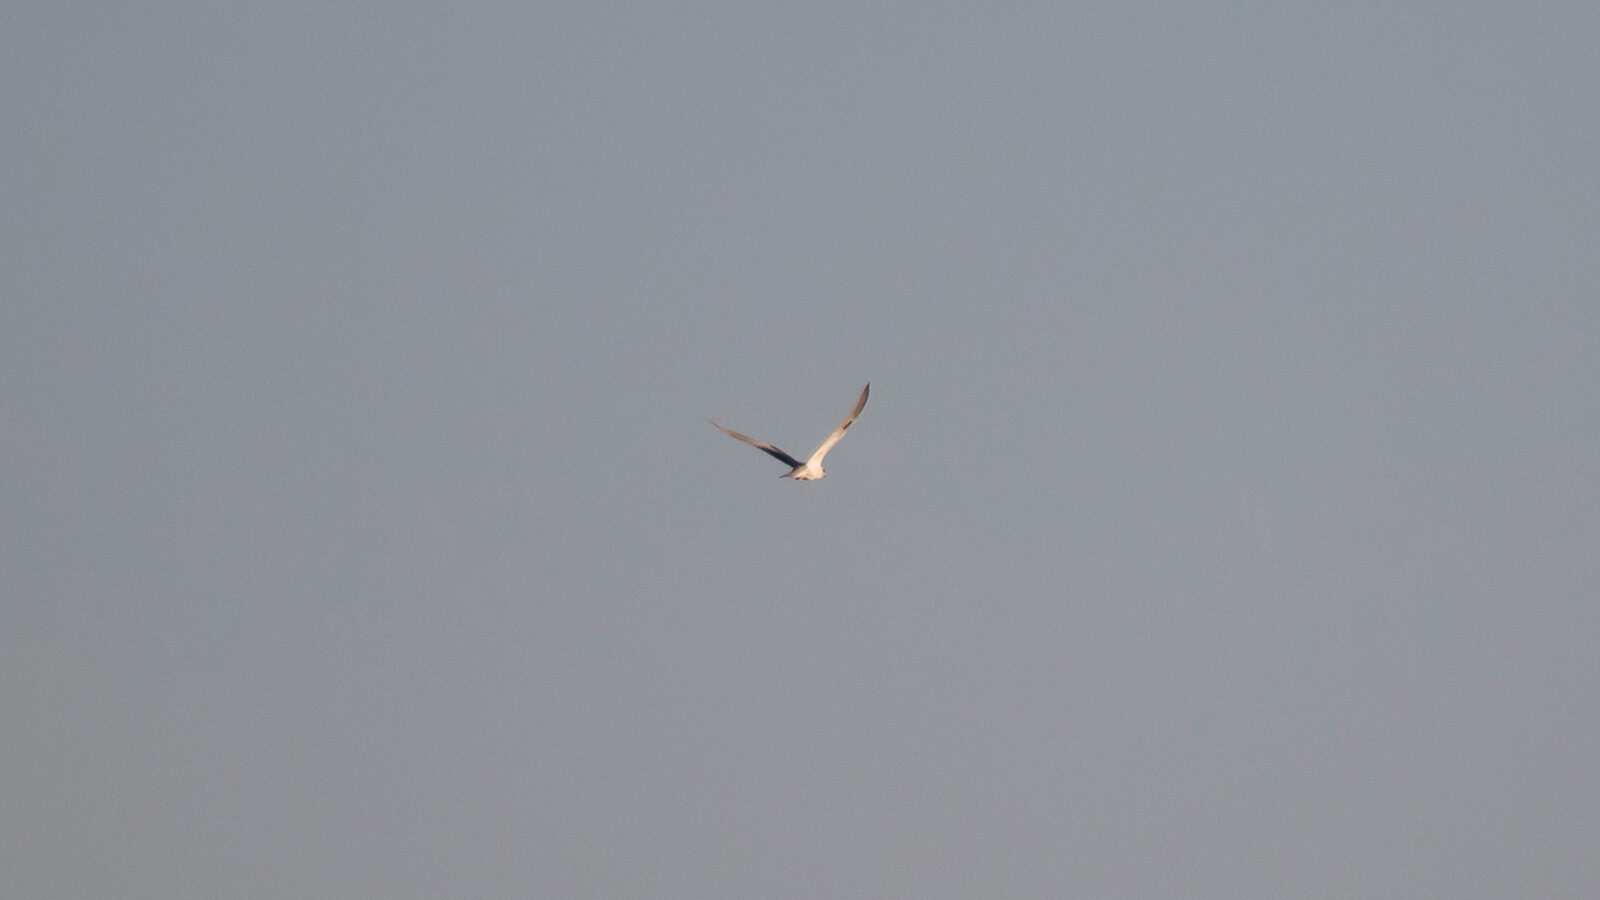 White-tailed kite soaring in the sky at dusk